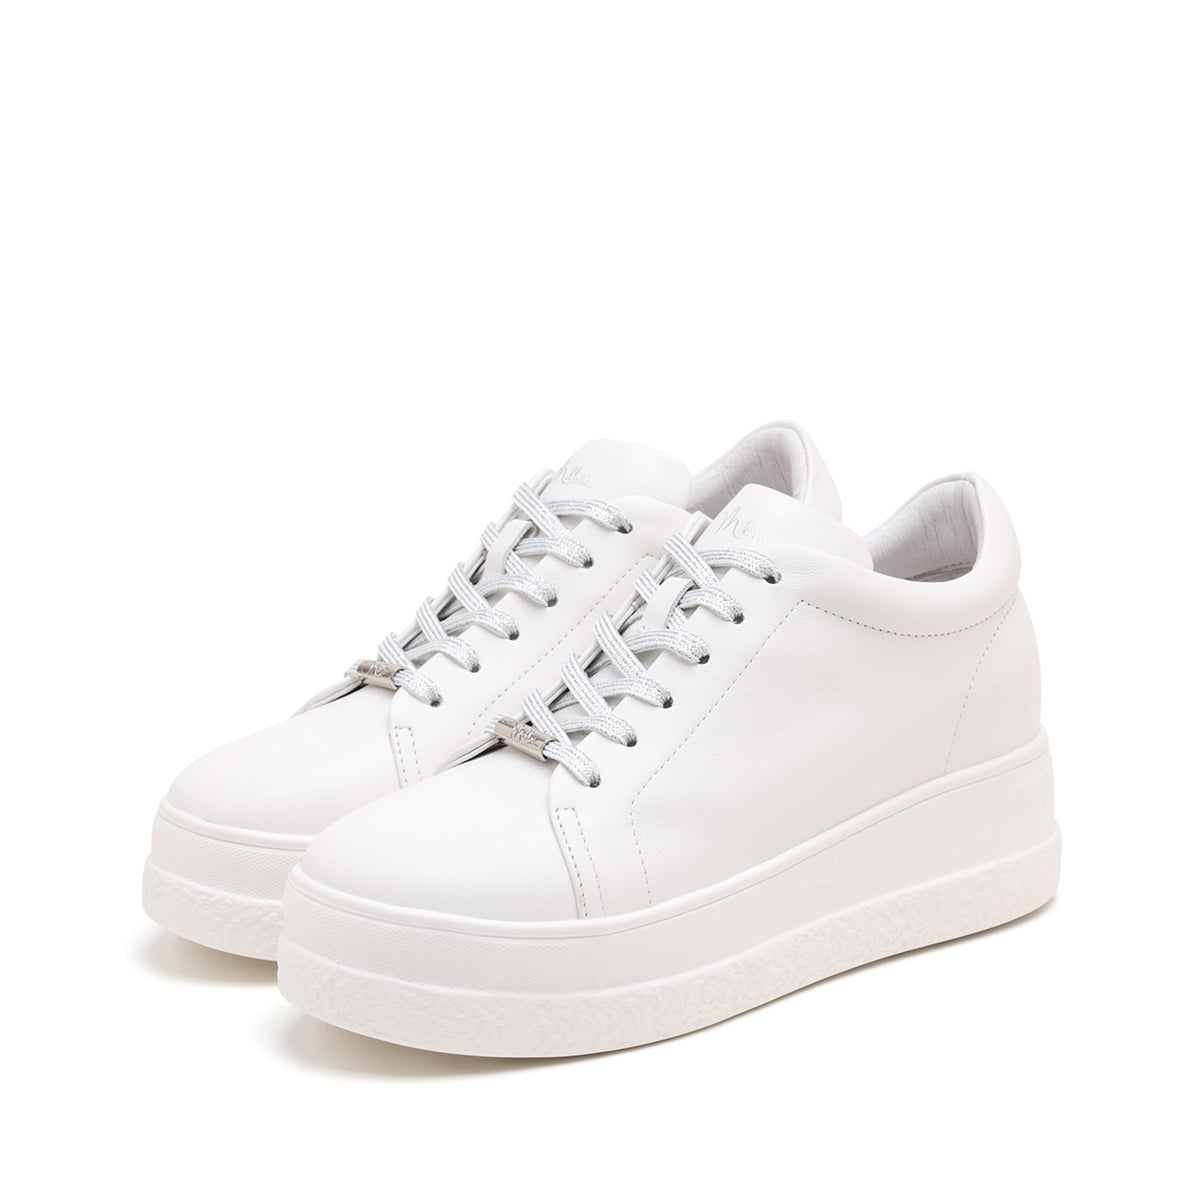 Off-white leather women's casual shoes